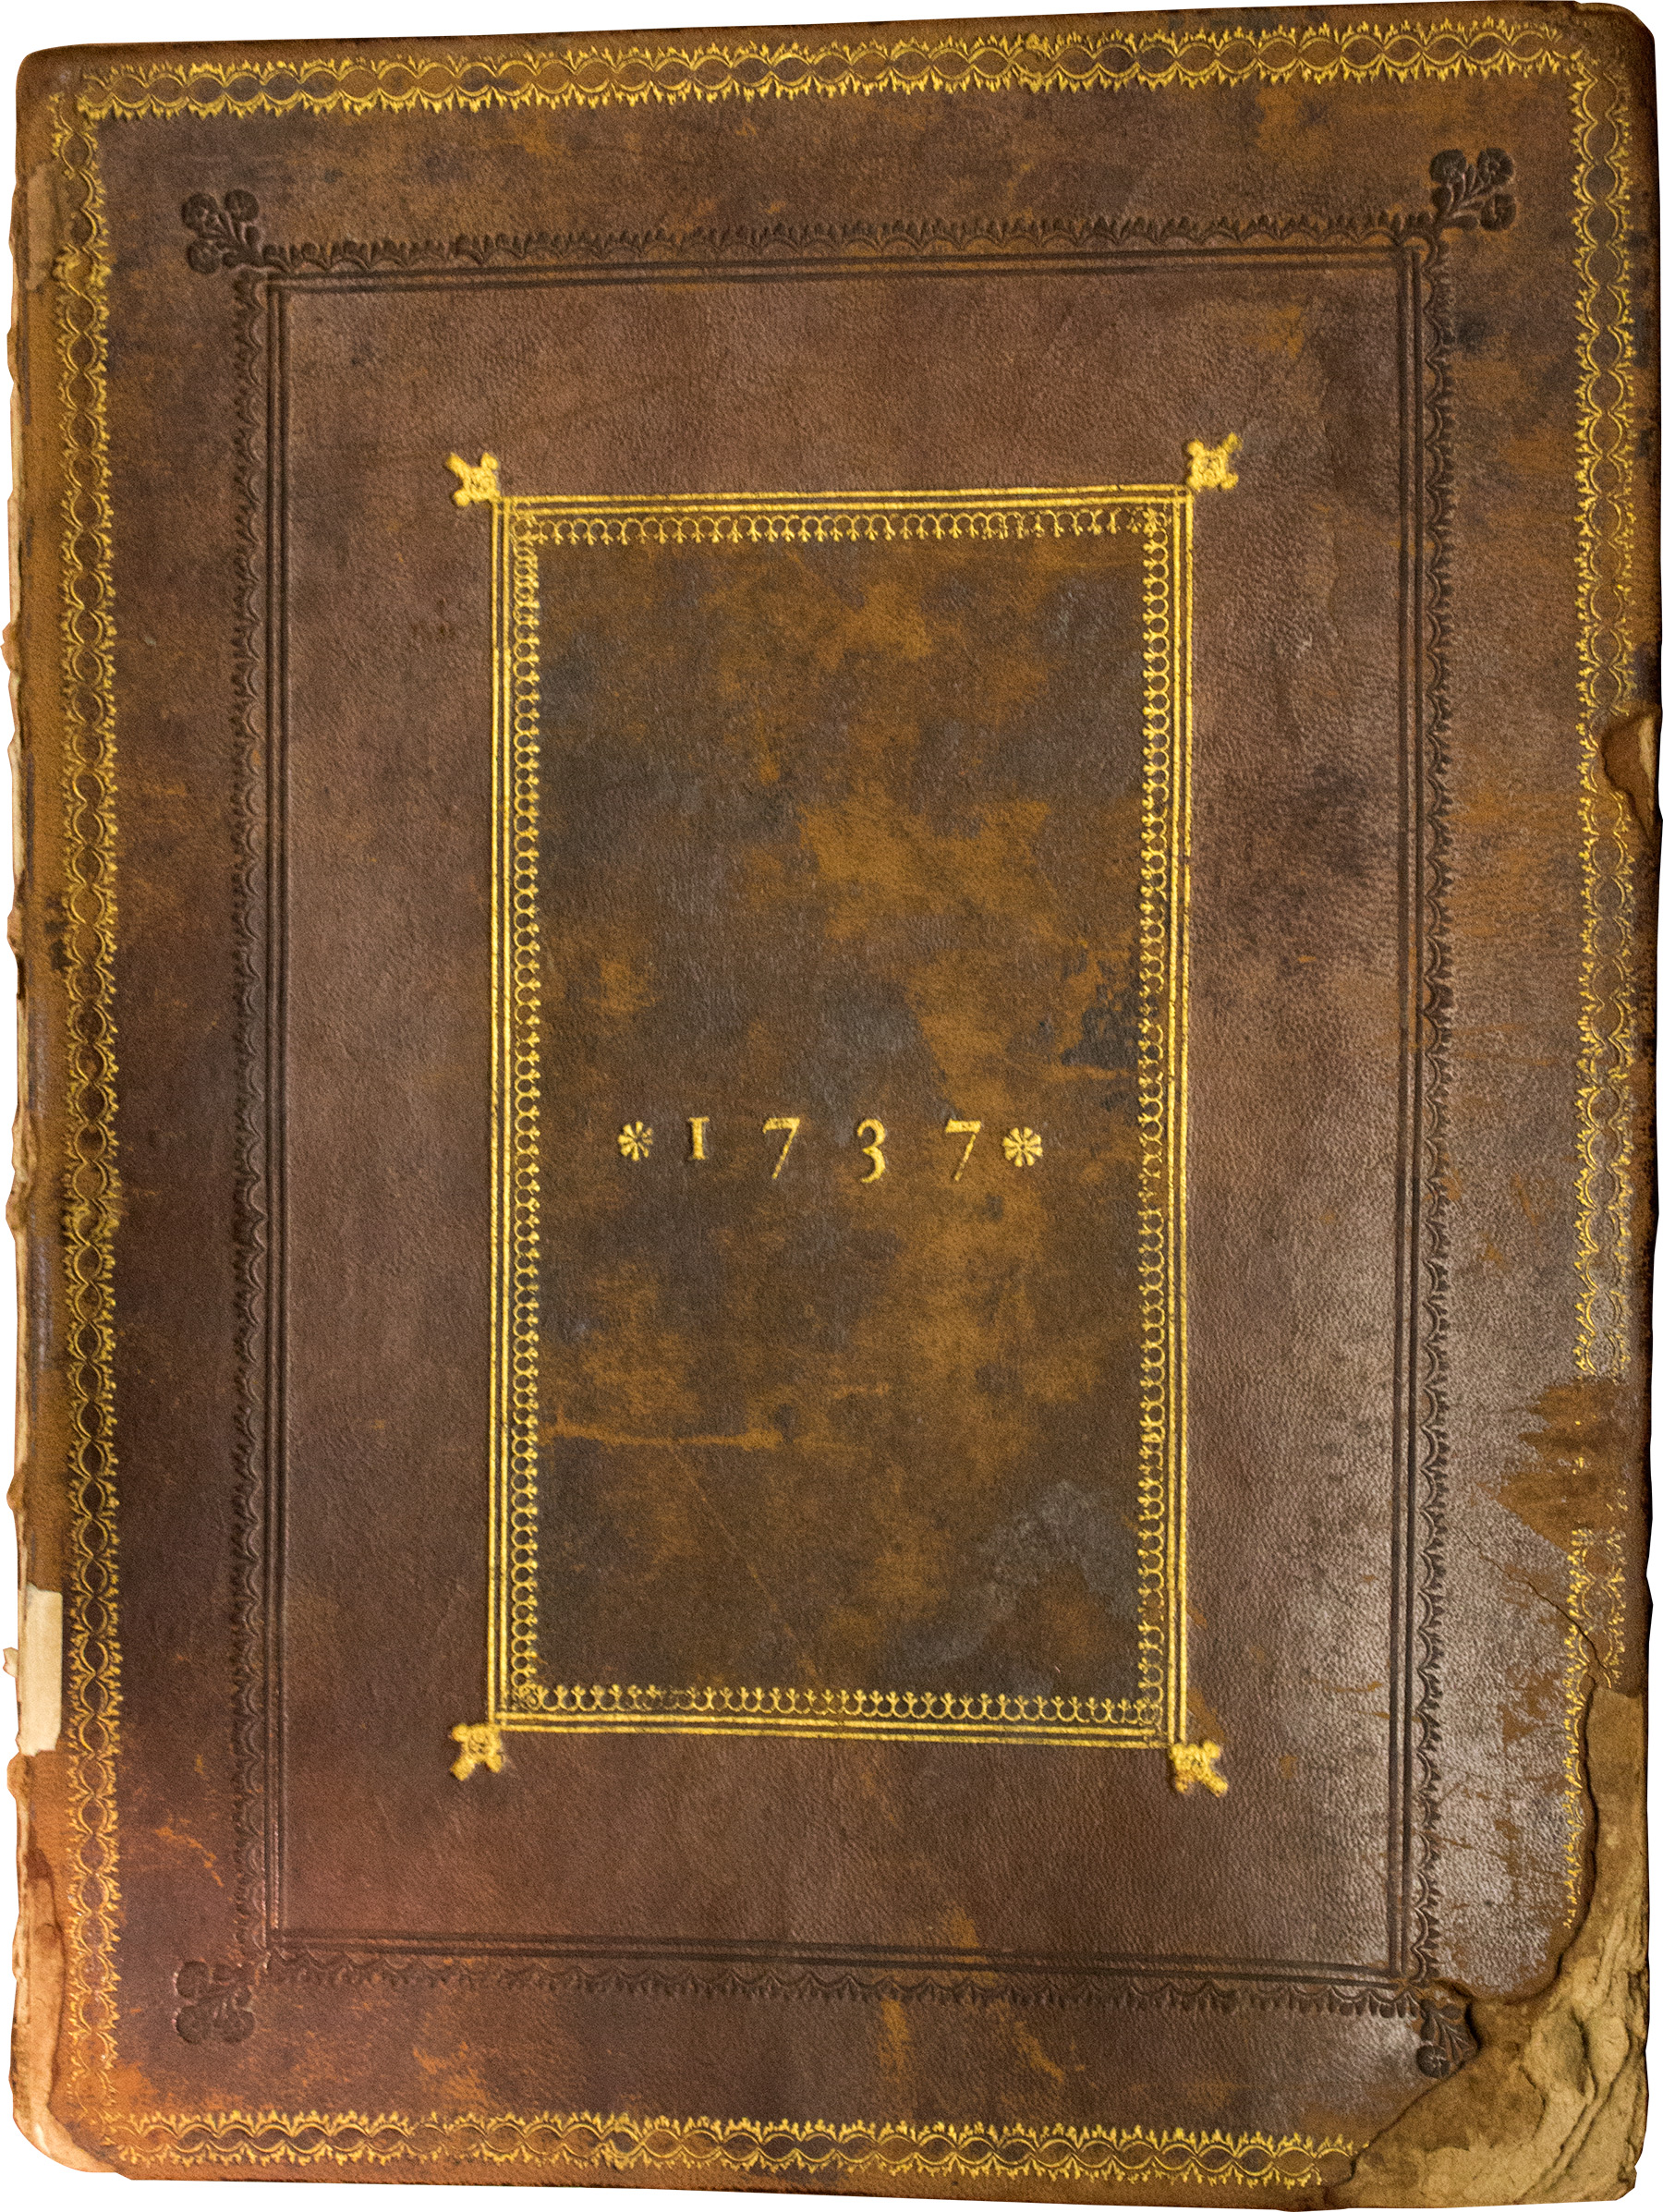 Cover, showing the year 1737